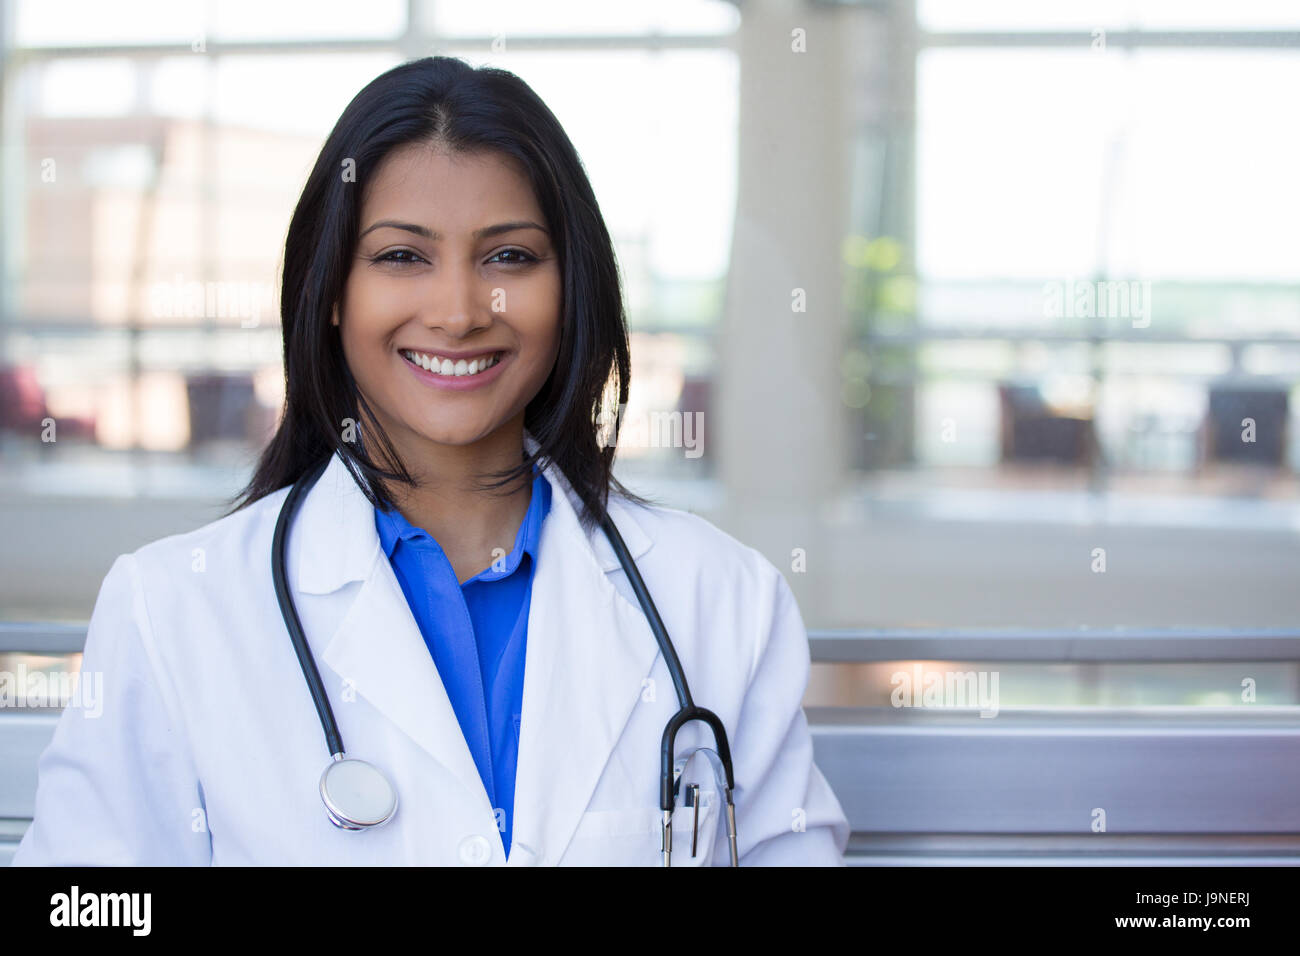 Closeup headshot portrait of friendly, cheerful, smiling confident female, healthcare professional with lab coat. isolated indoor clinic office backgr Stock Photo